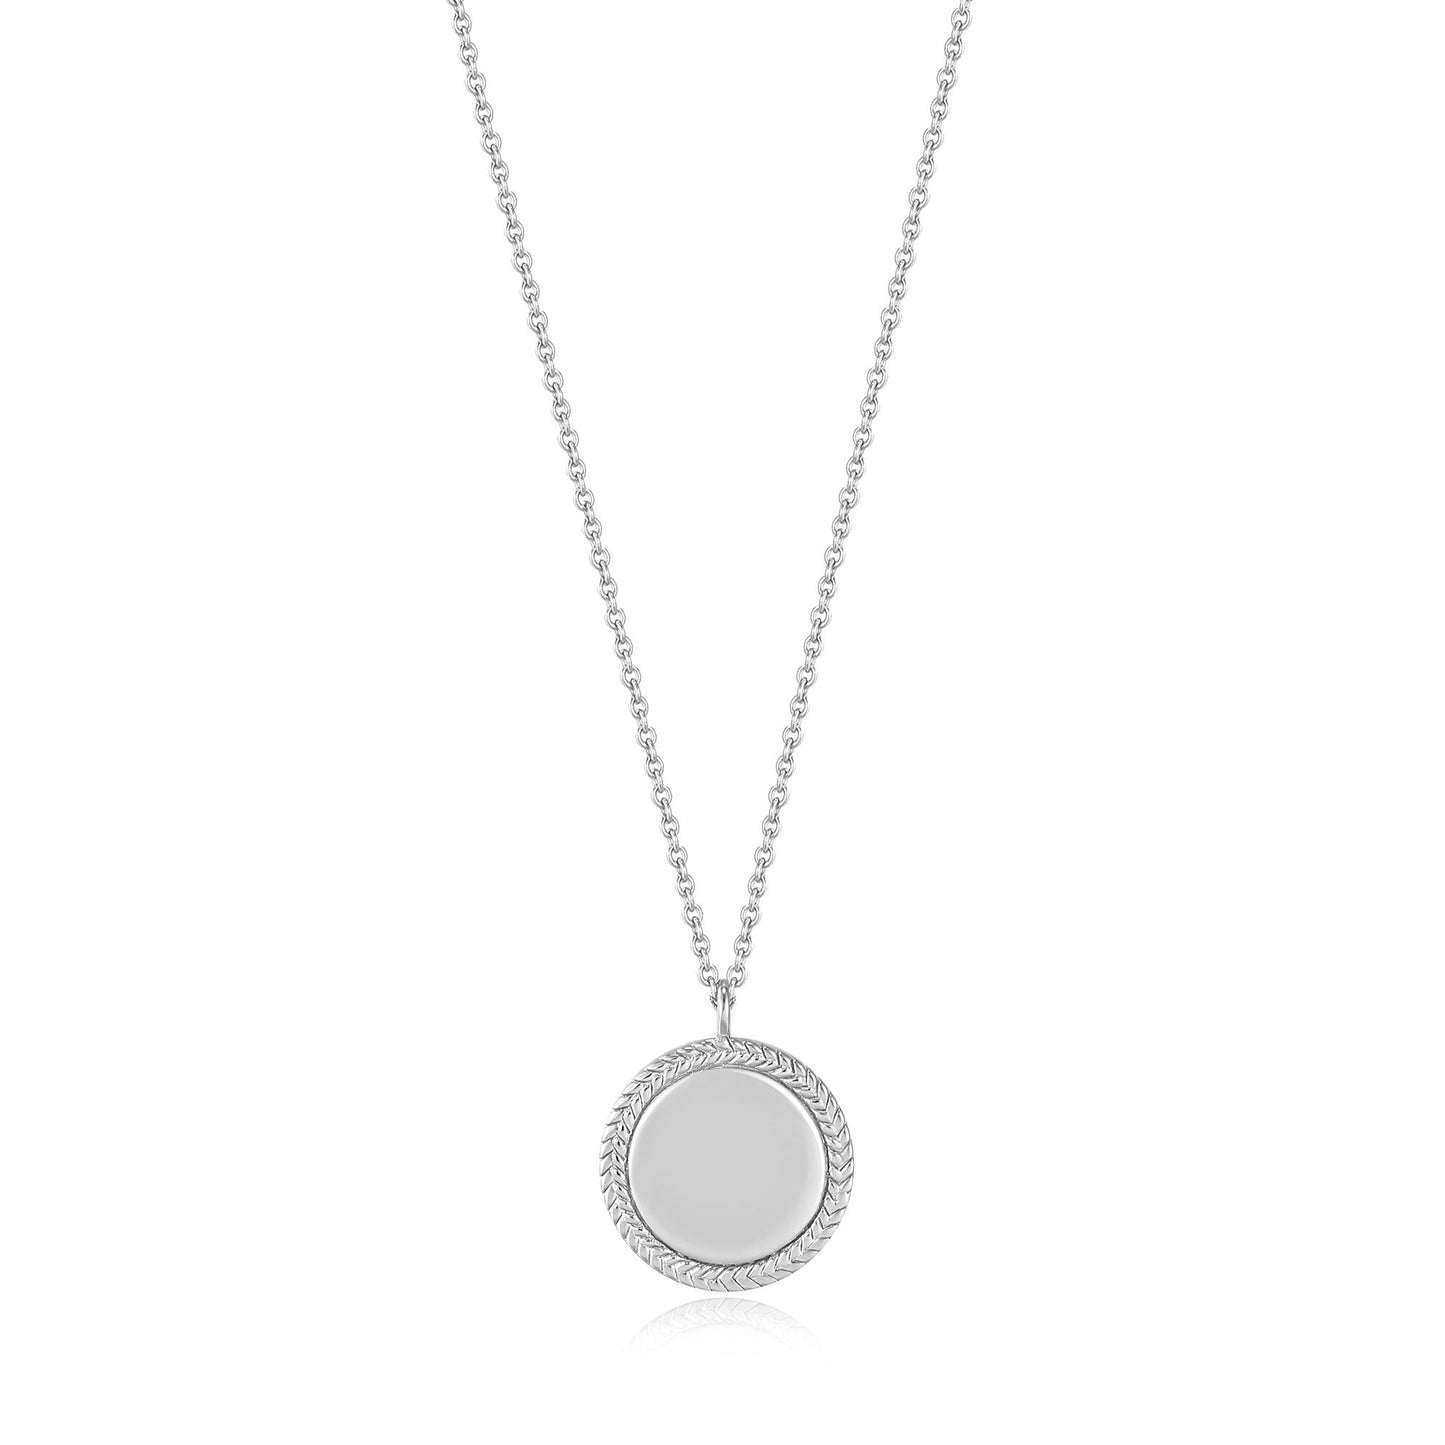 ROPES & DREAMS SILVER ROPE DISC NECKLACE